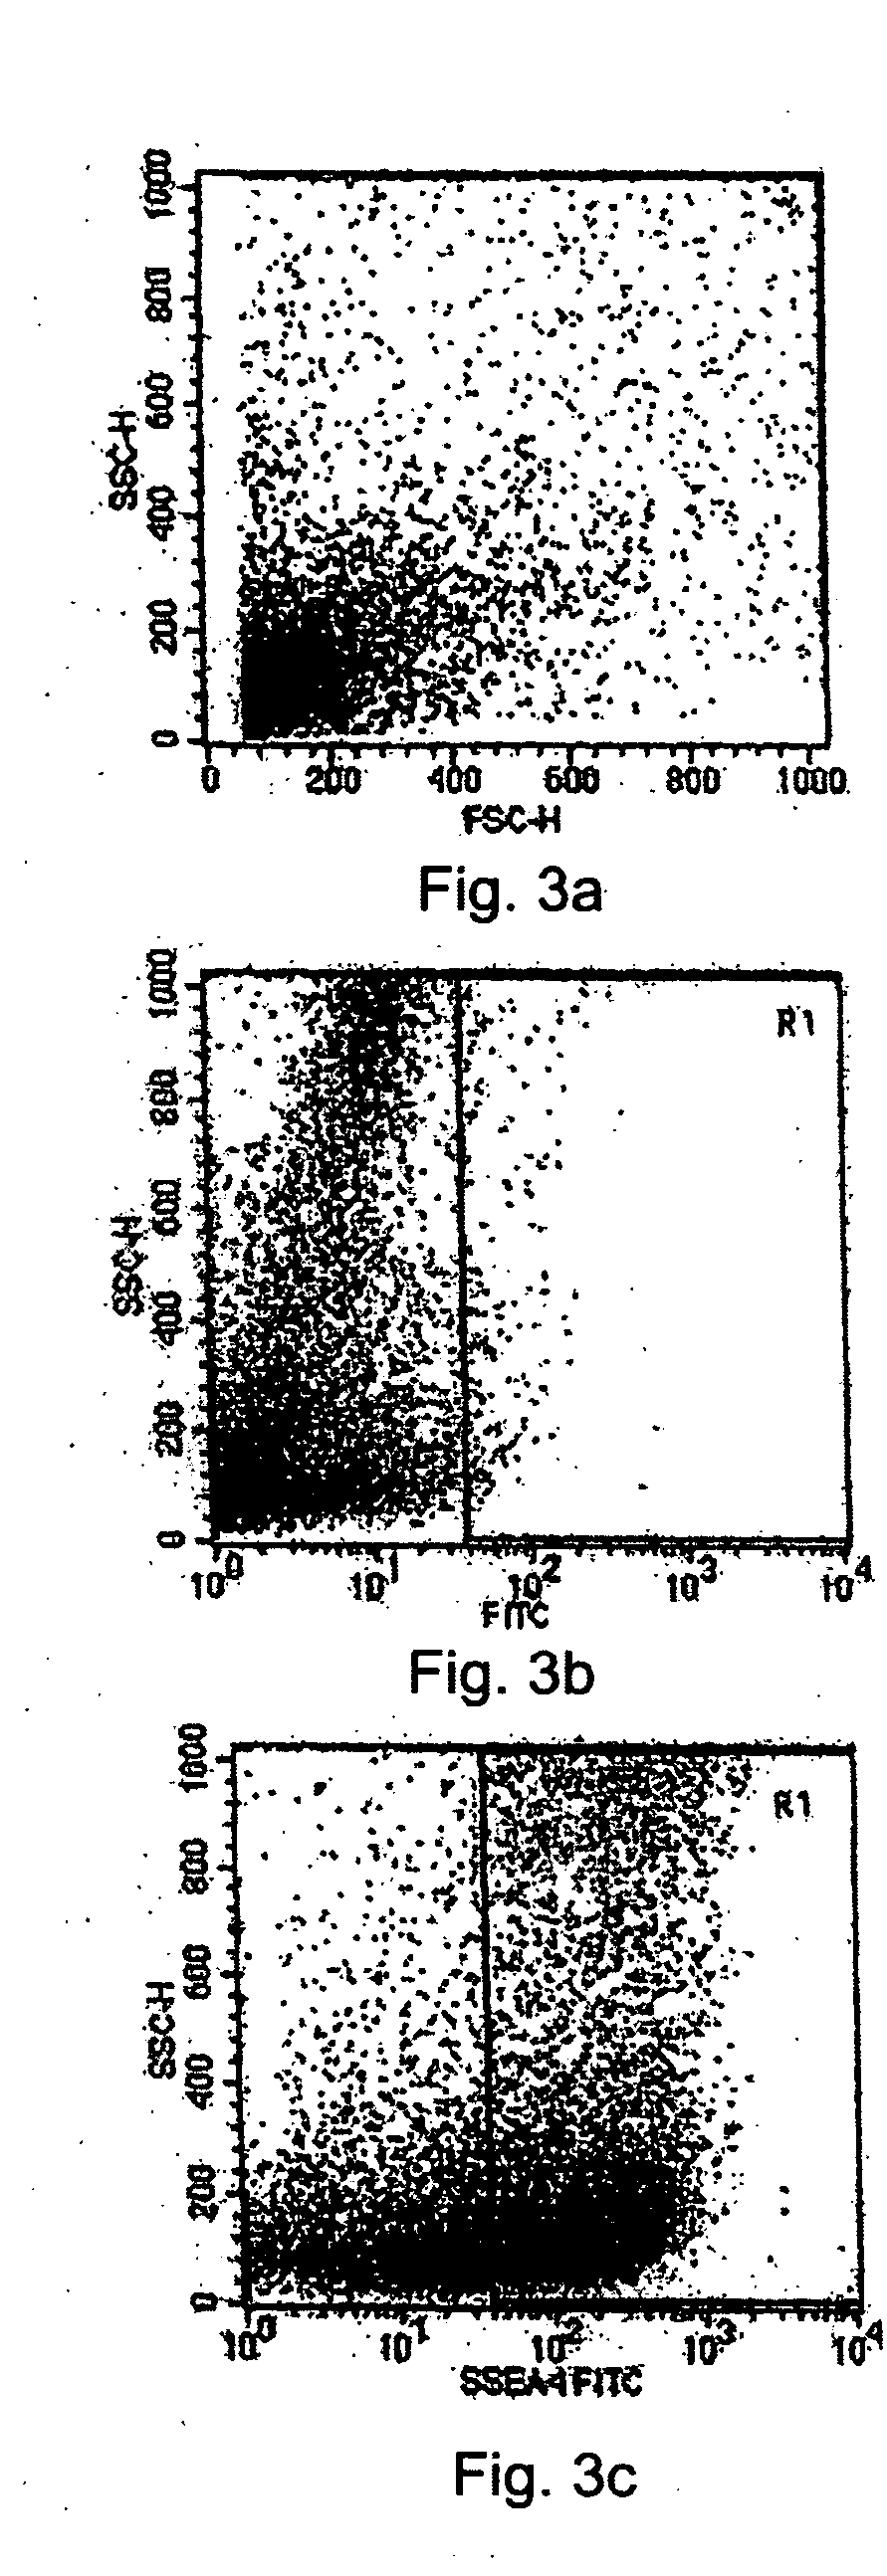 Tissue system with undifferentiated stem cells derived from corneal limbus